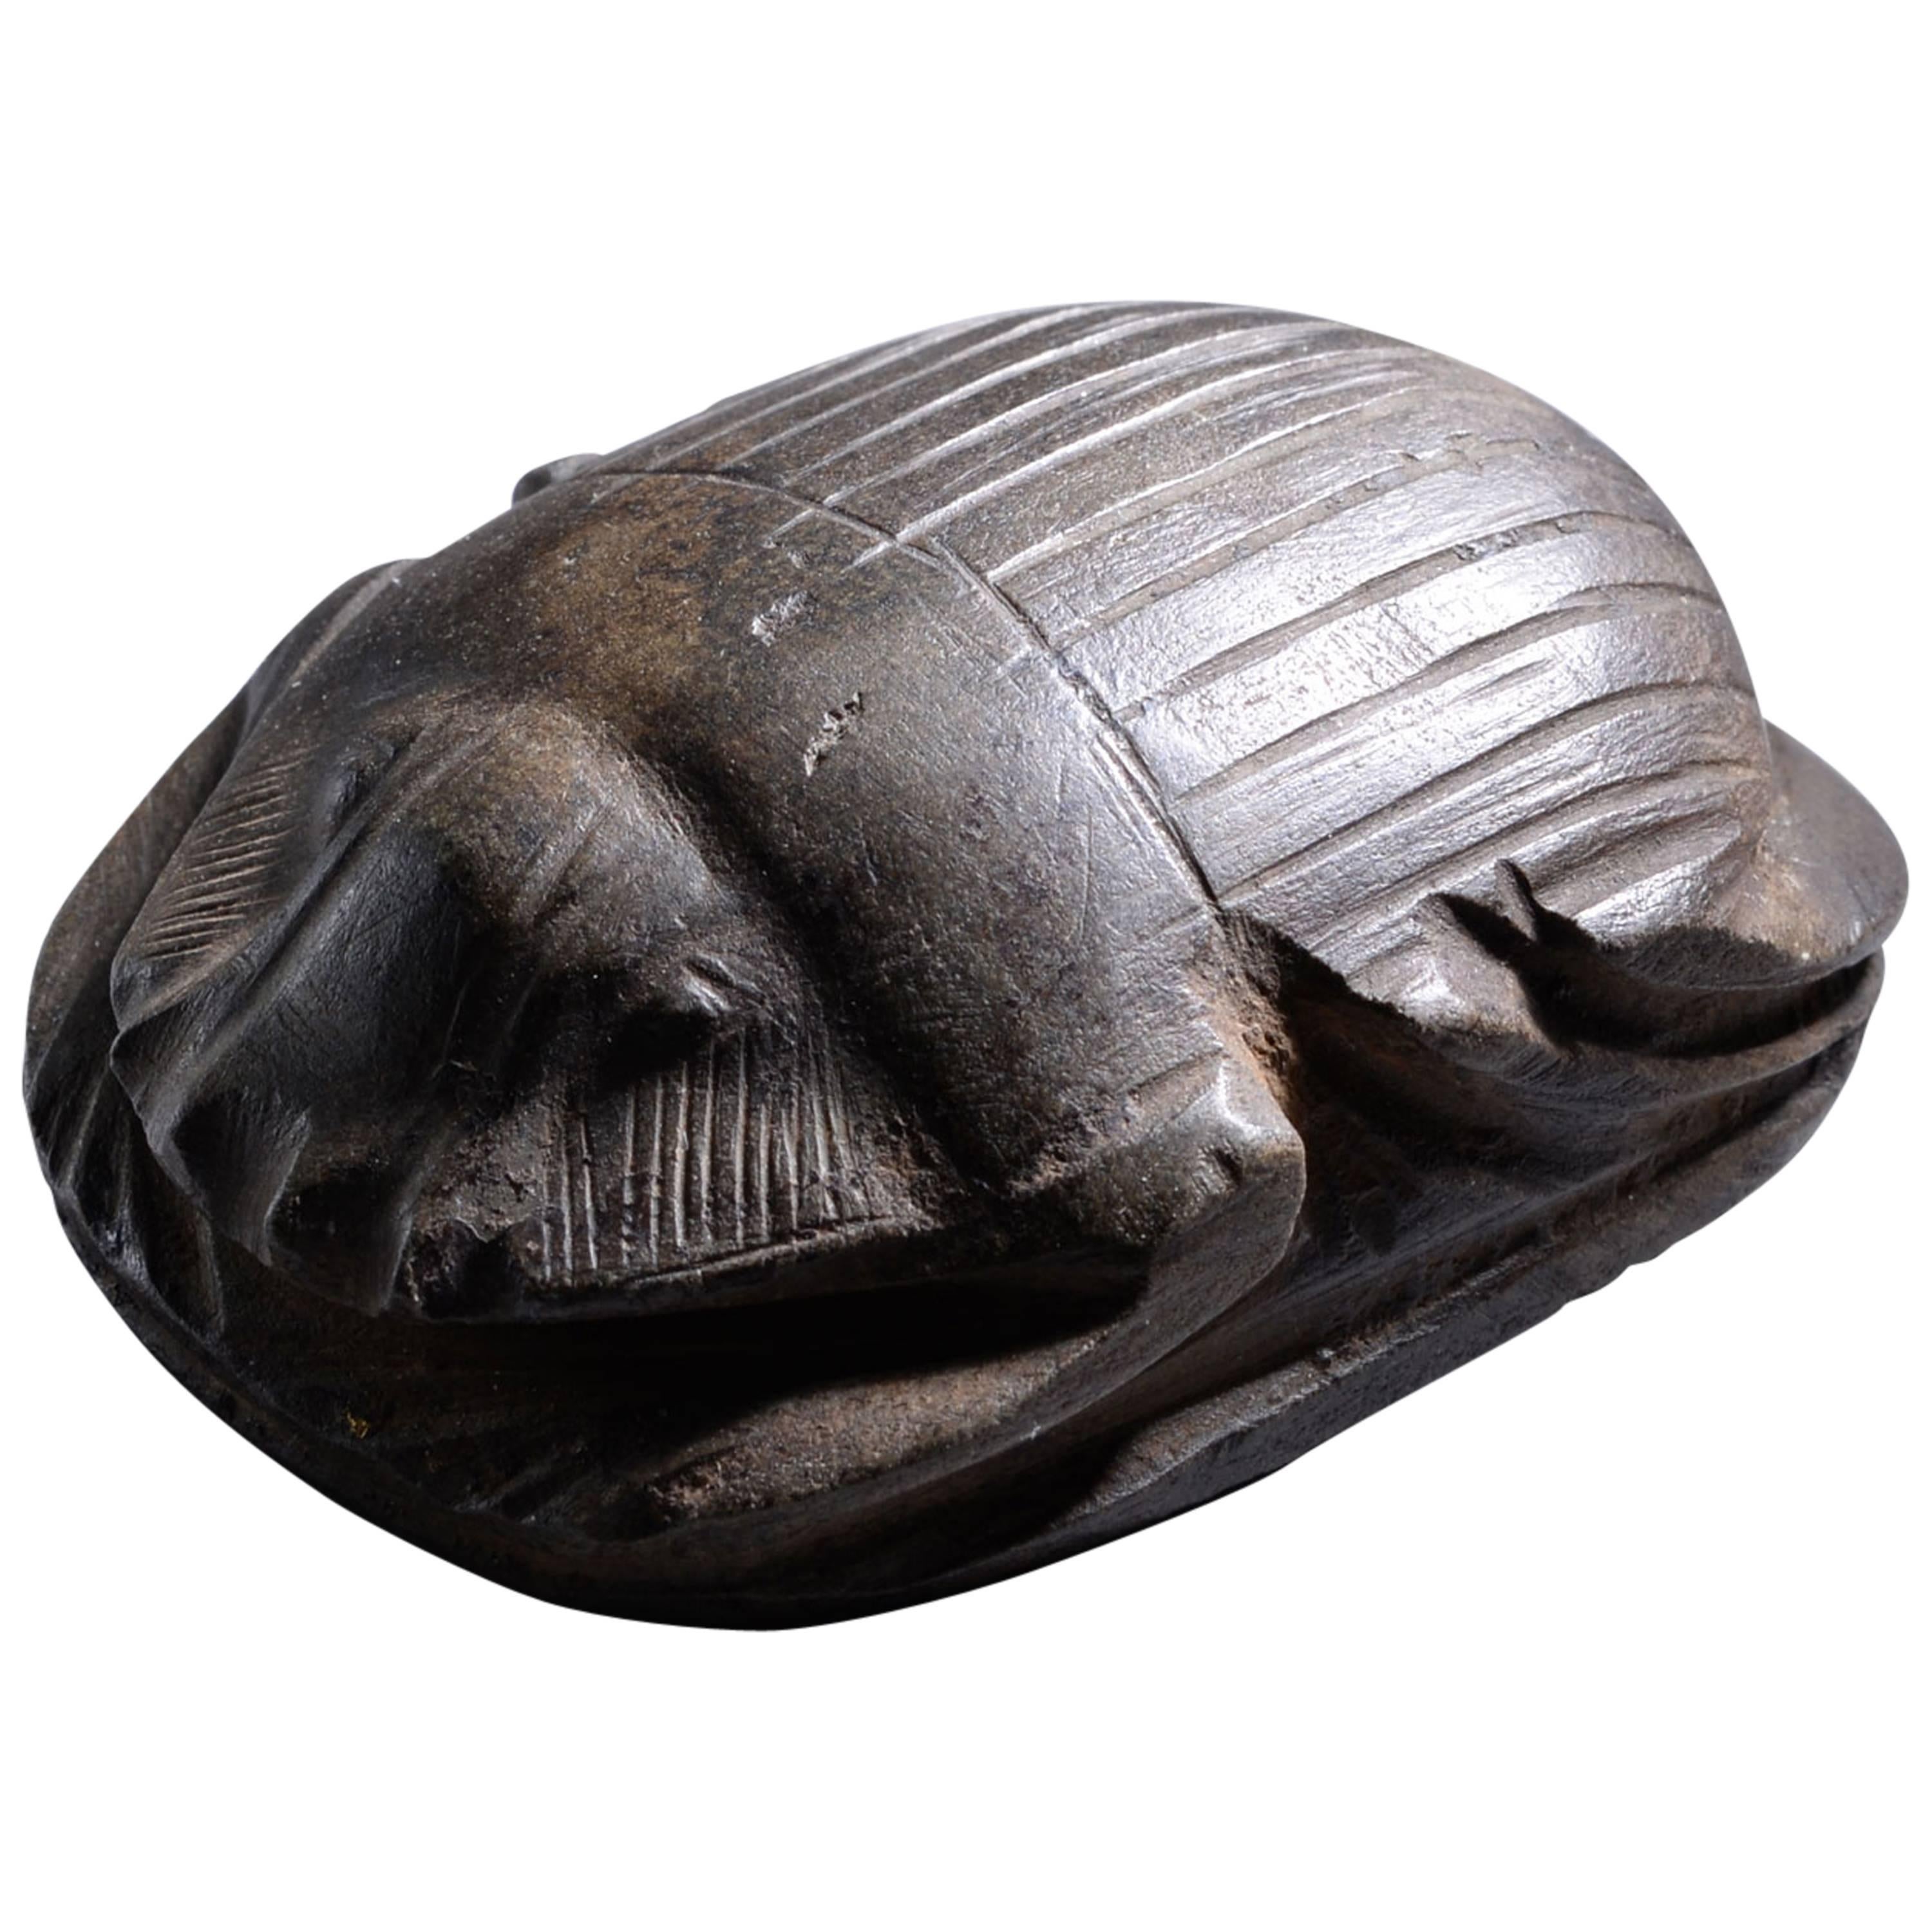 Ancient Egyptian Stone Heart Scarab Beetle, 664 BC